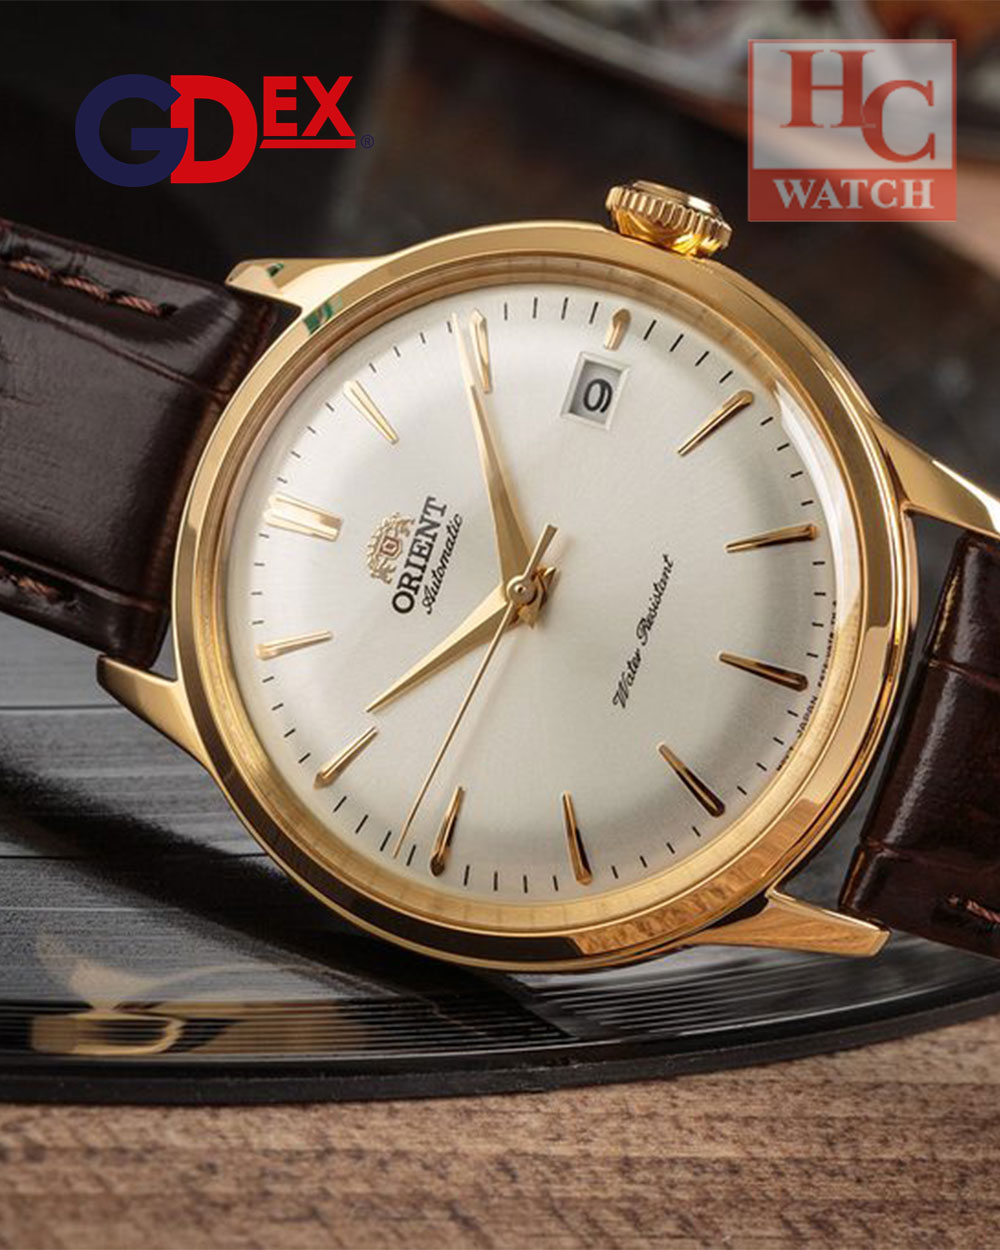 Orient RA-AC0M01S Classic Bambino White Dial Leather